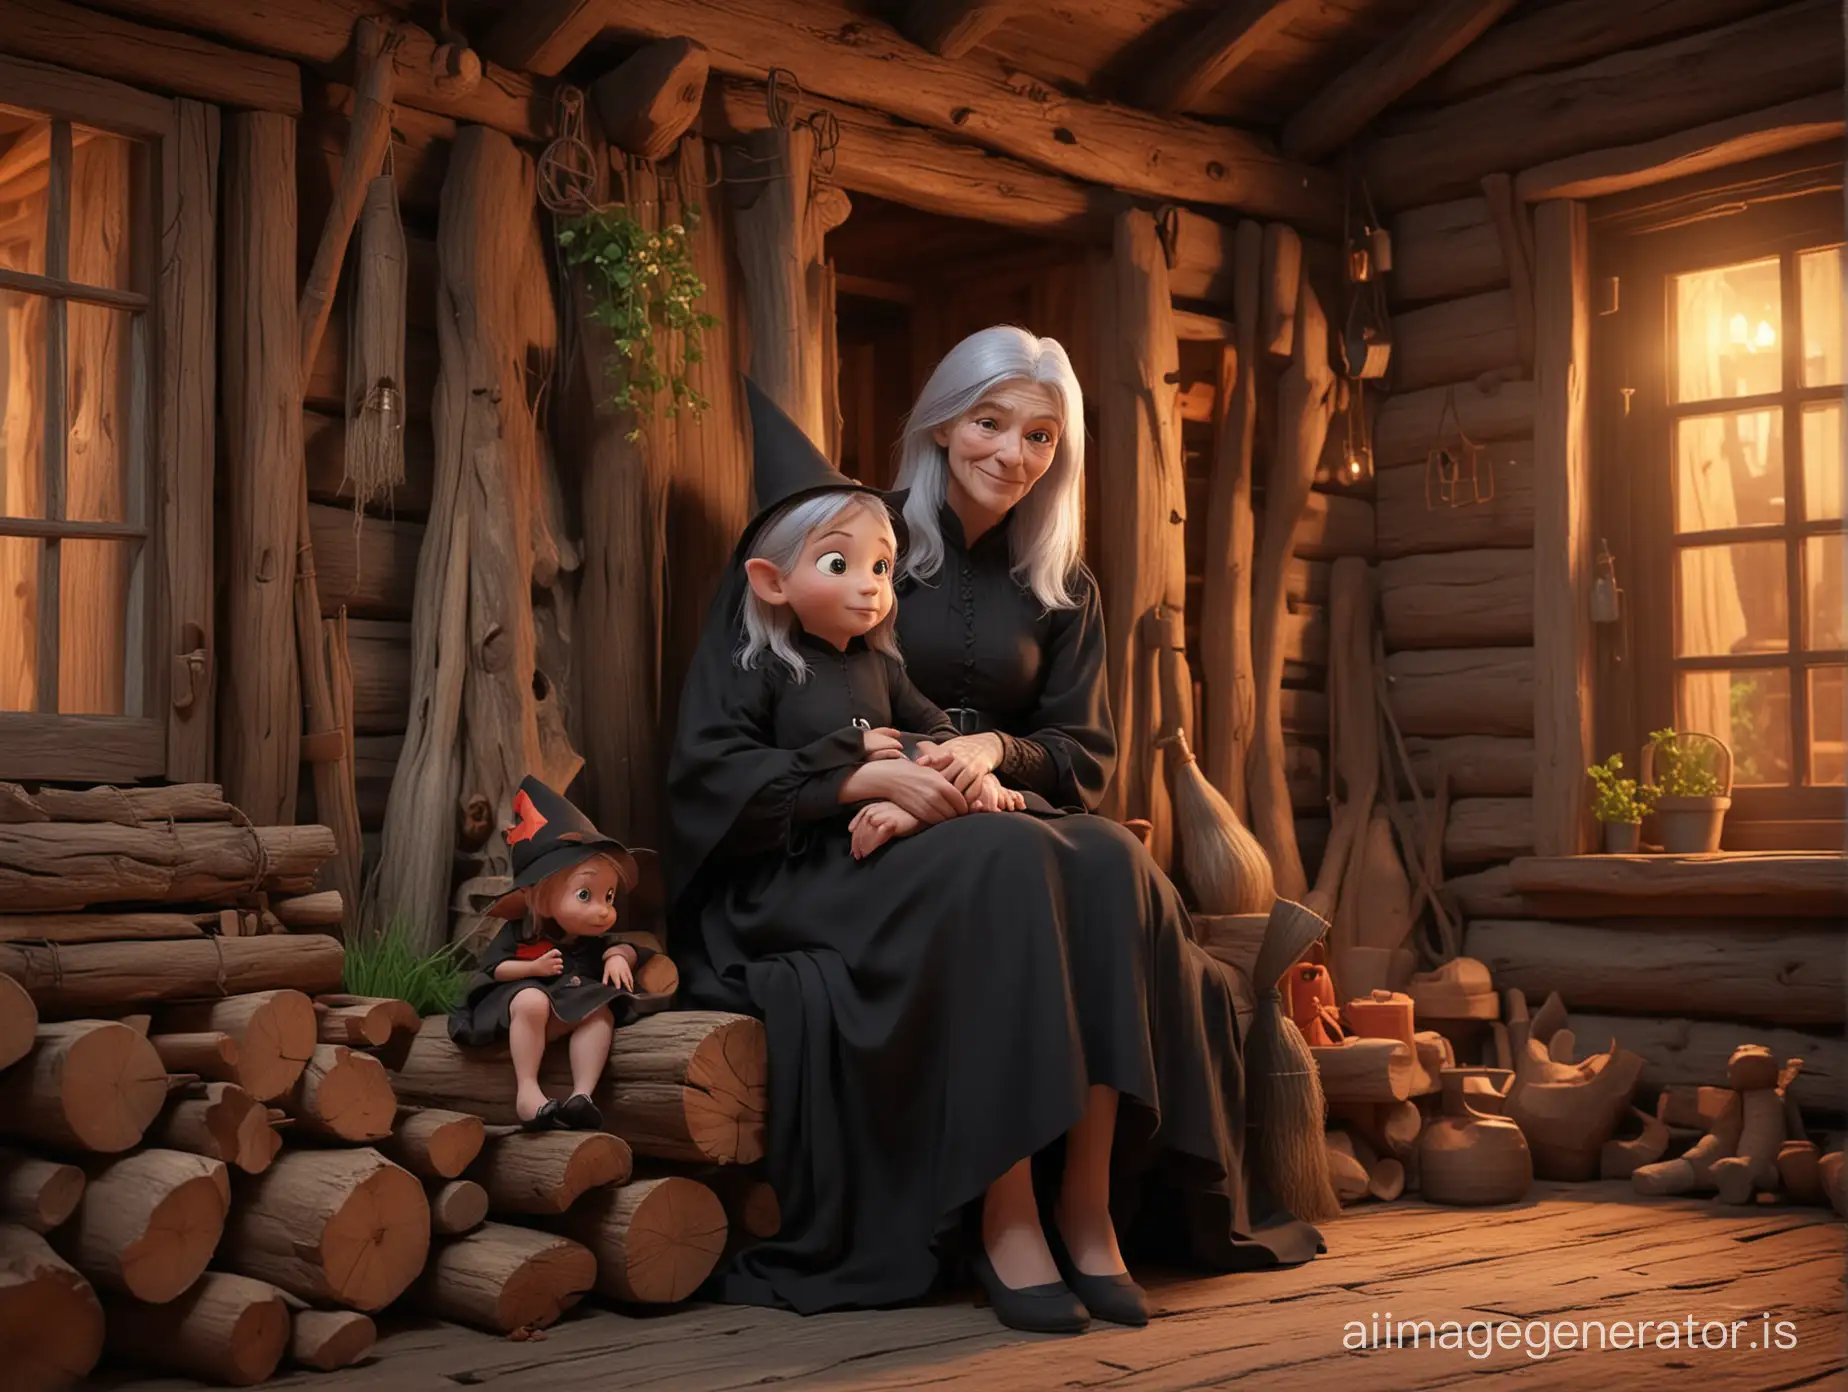 A grandmother in a black dress, with gray hair, looks like a cute elderly witch, sits with her granddaughter on her lap, the granddaughter has red hair and green eyes, she is very sweet, against the backdrop of the ancient interior of a log hut, night outside the window, cartoon style, 3D rendering, magical atmosphere